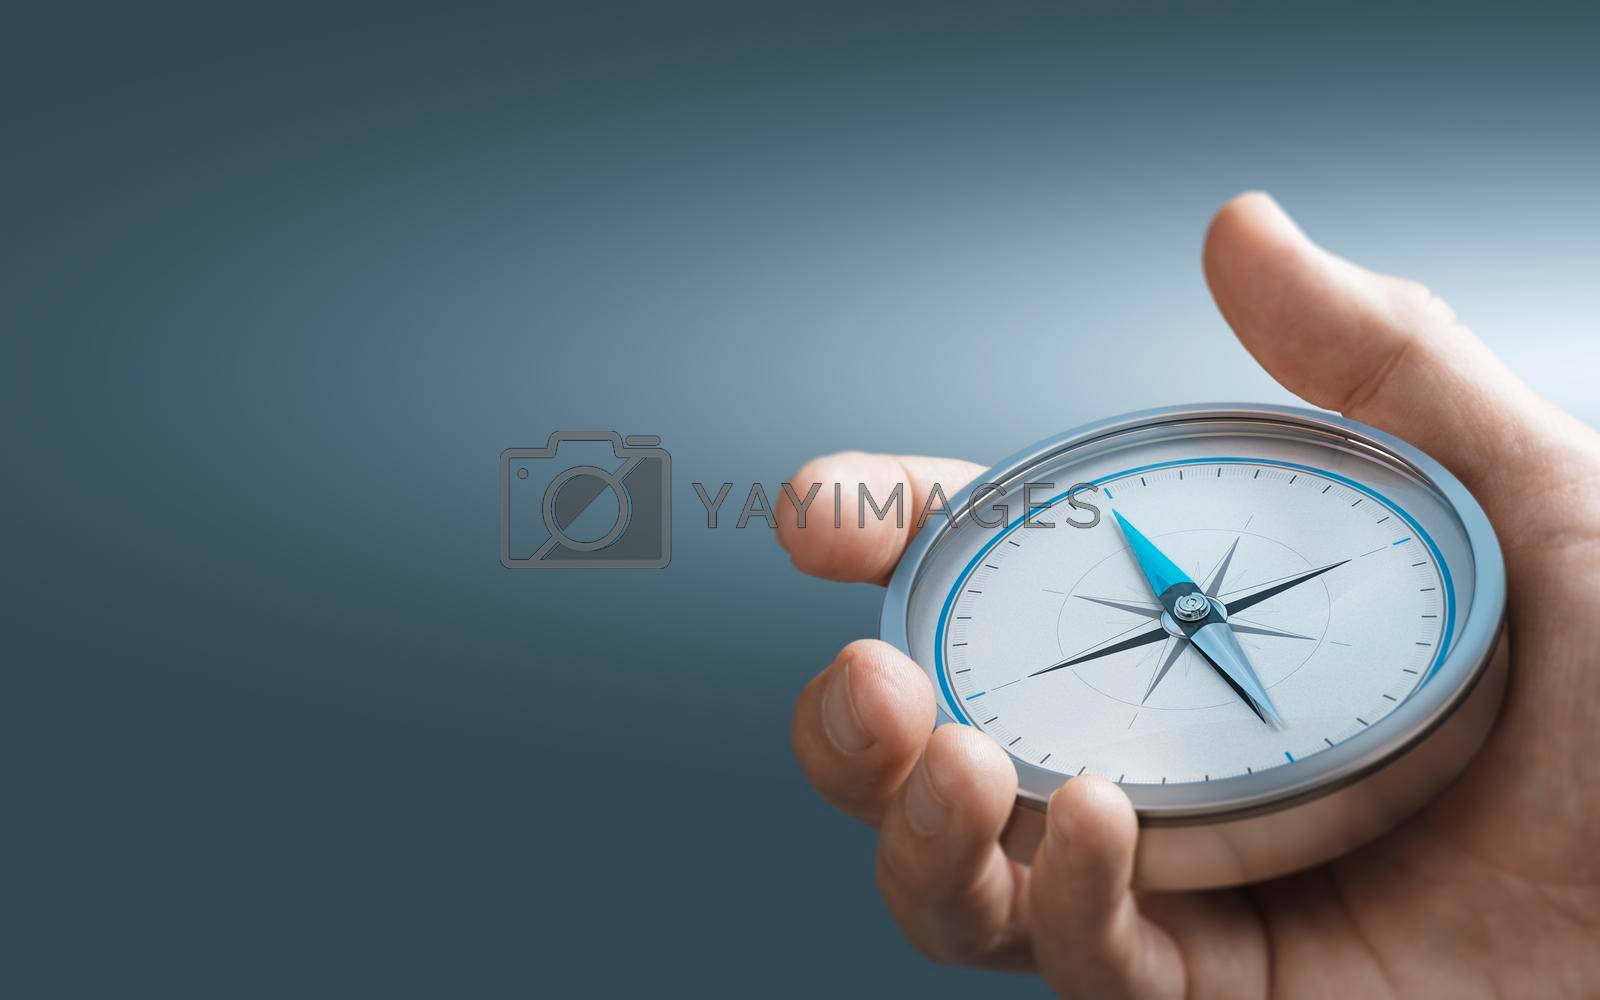 Hand holding a compass over blue background with copy space. Concept of Strategic orientation in business or marketing. Composite image between a 3d illustration and a photography.